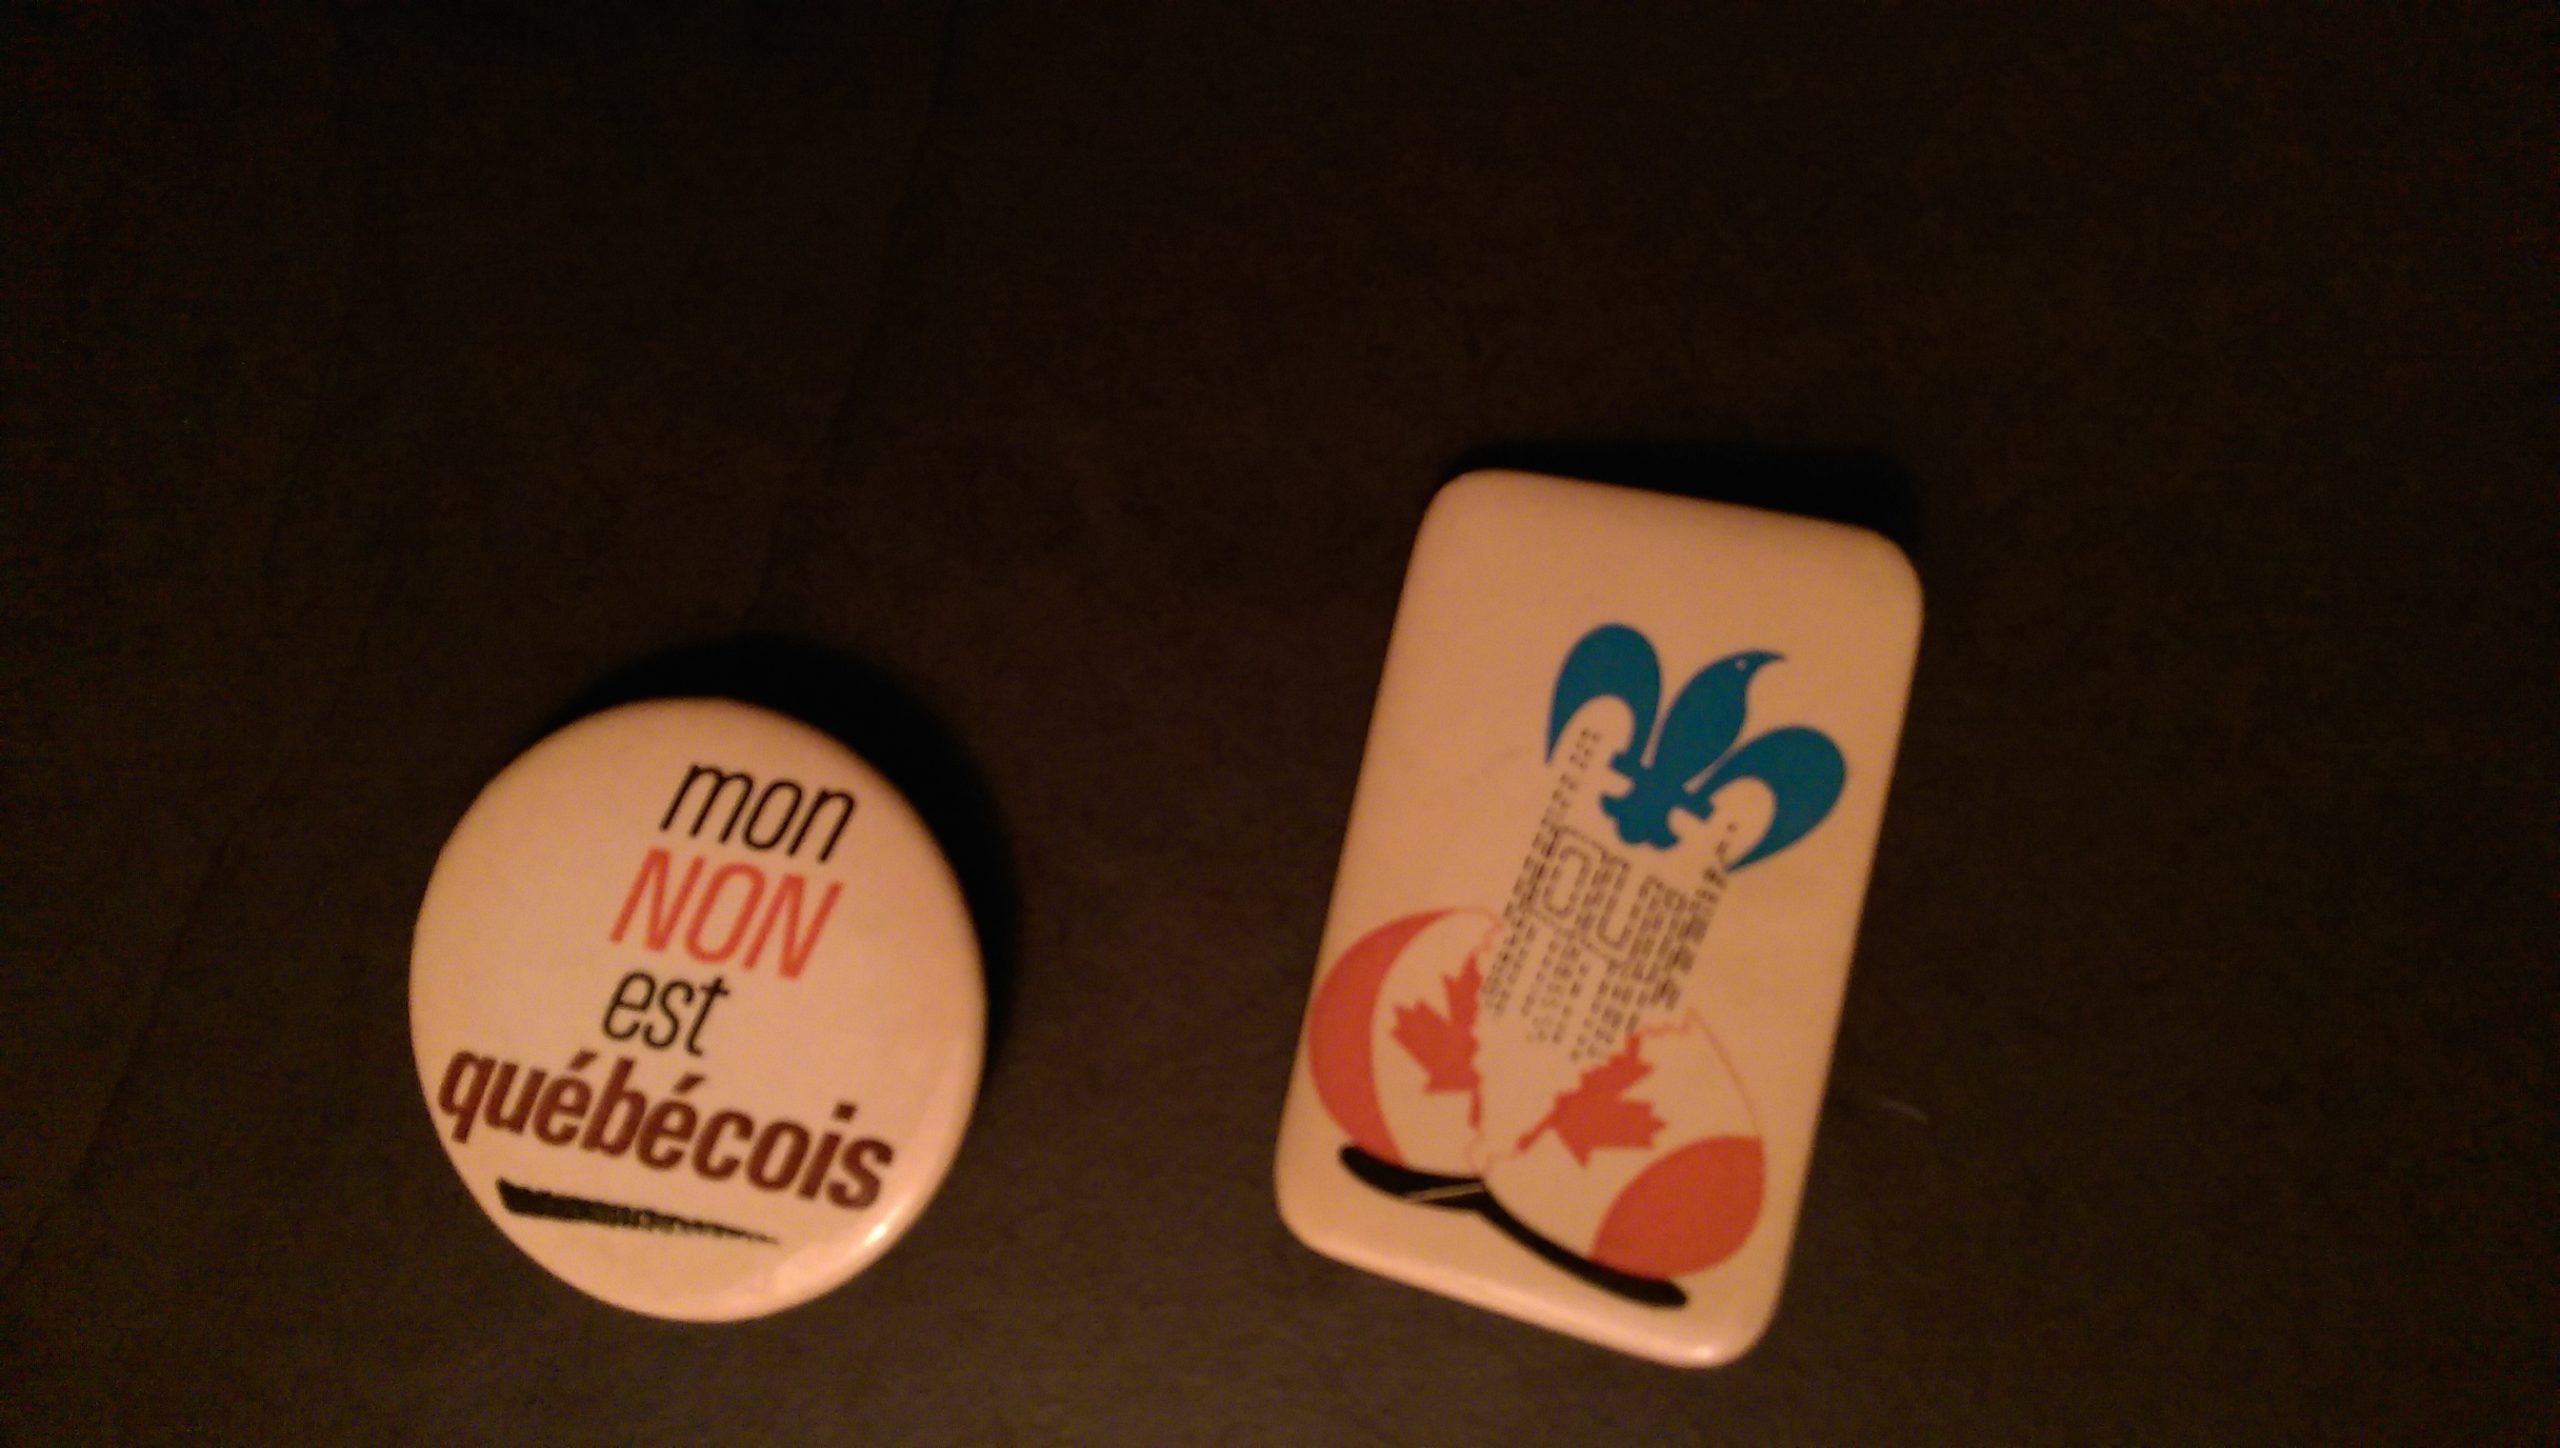 Two badges from the 1995 Quebec independence referendum. Long description available.